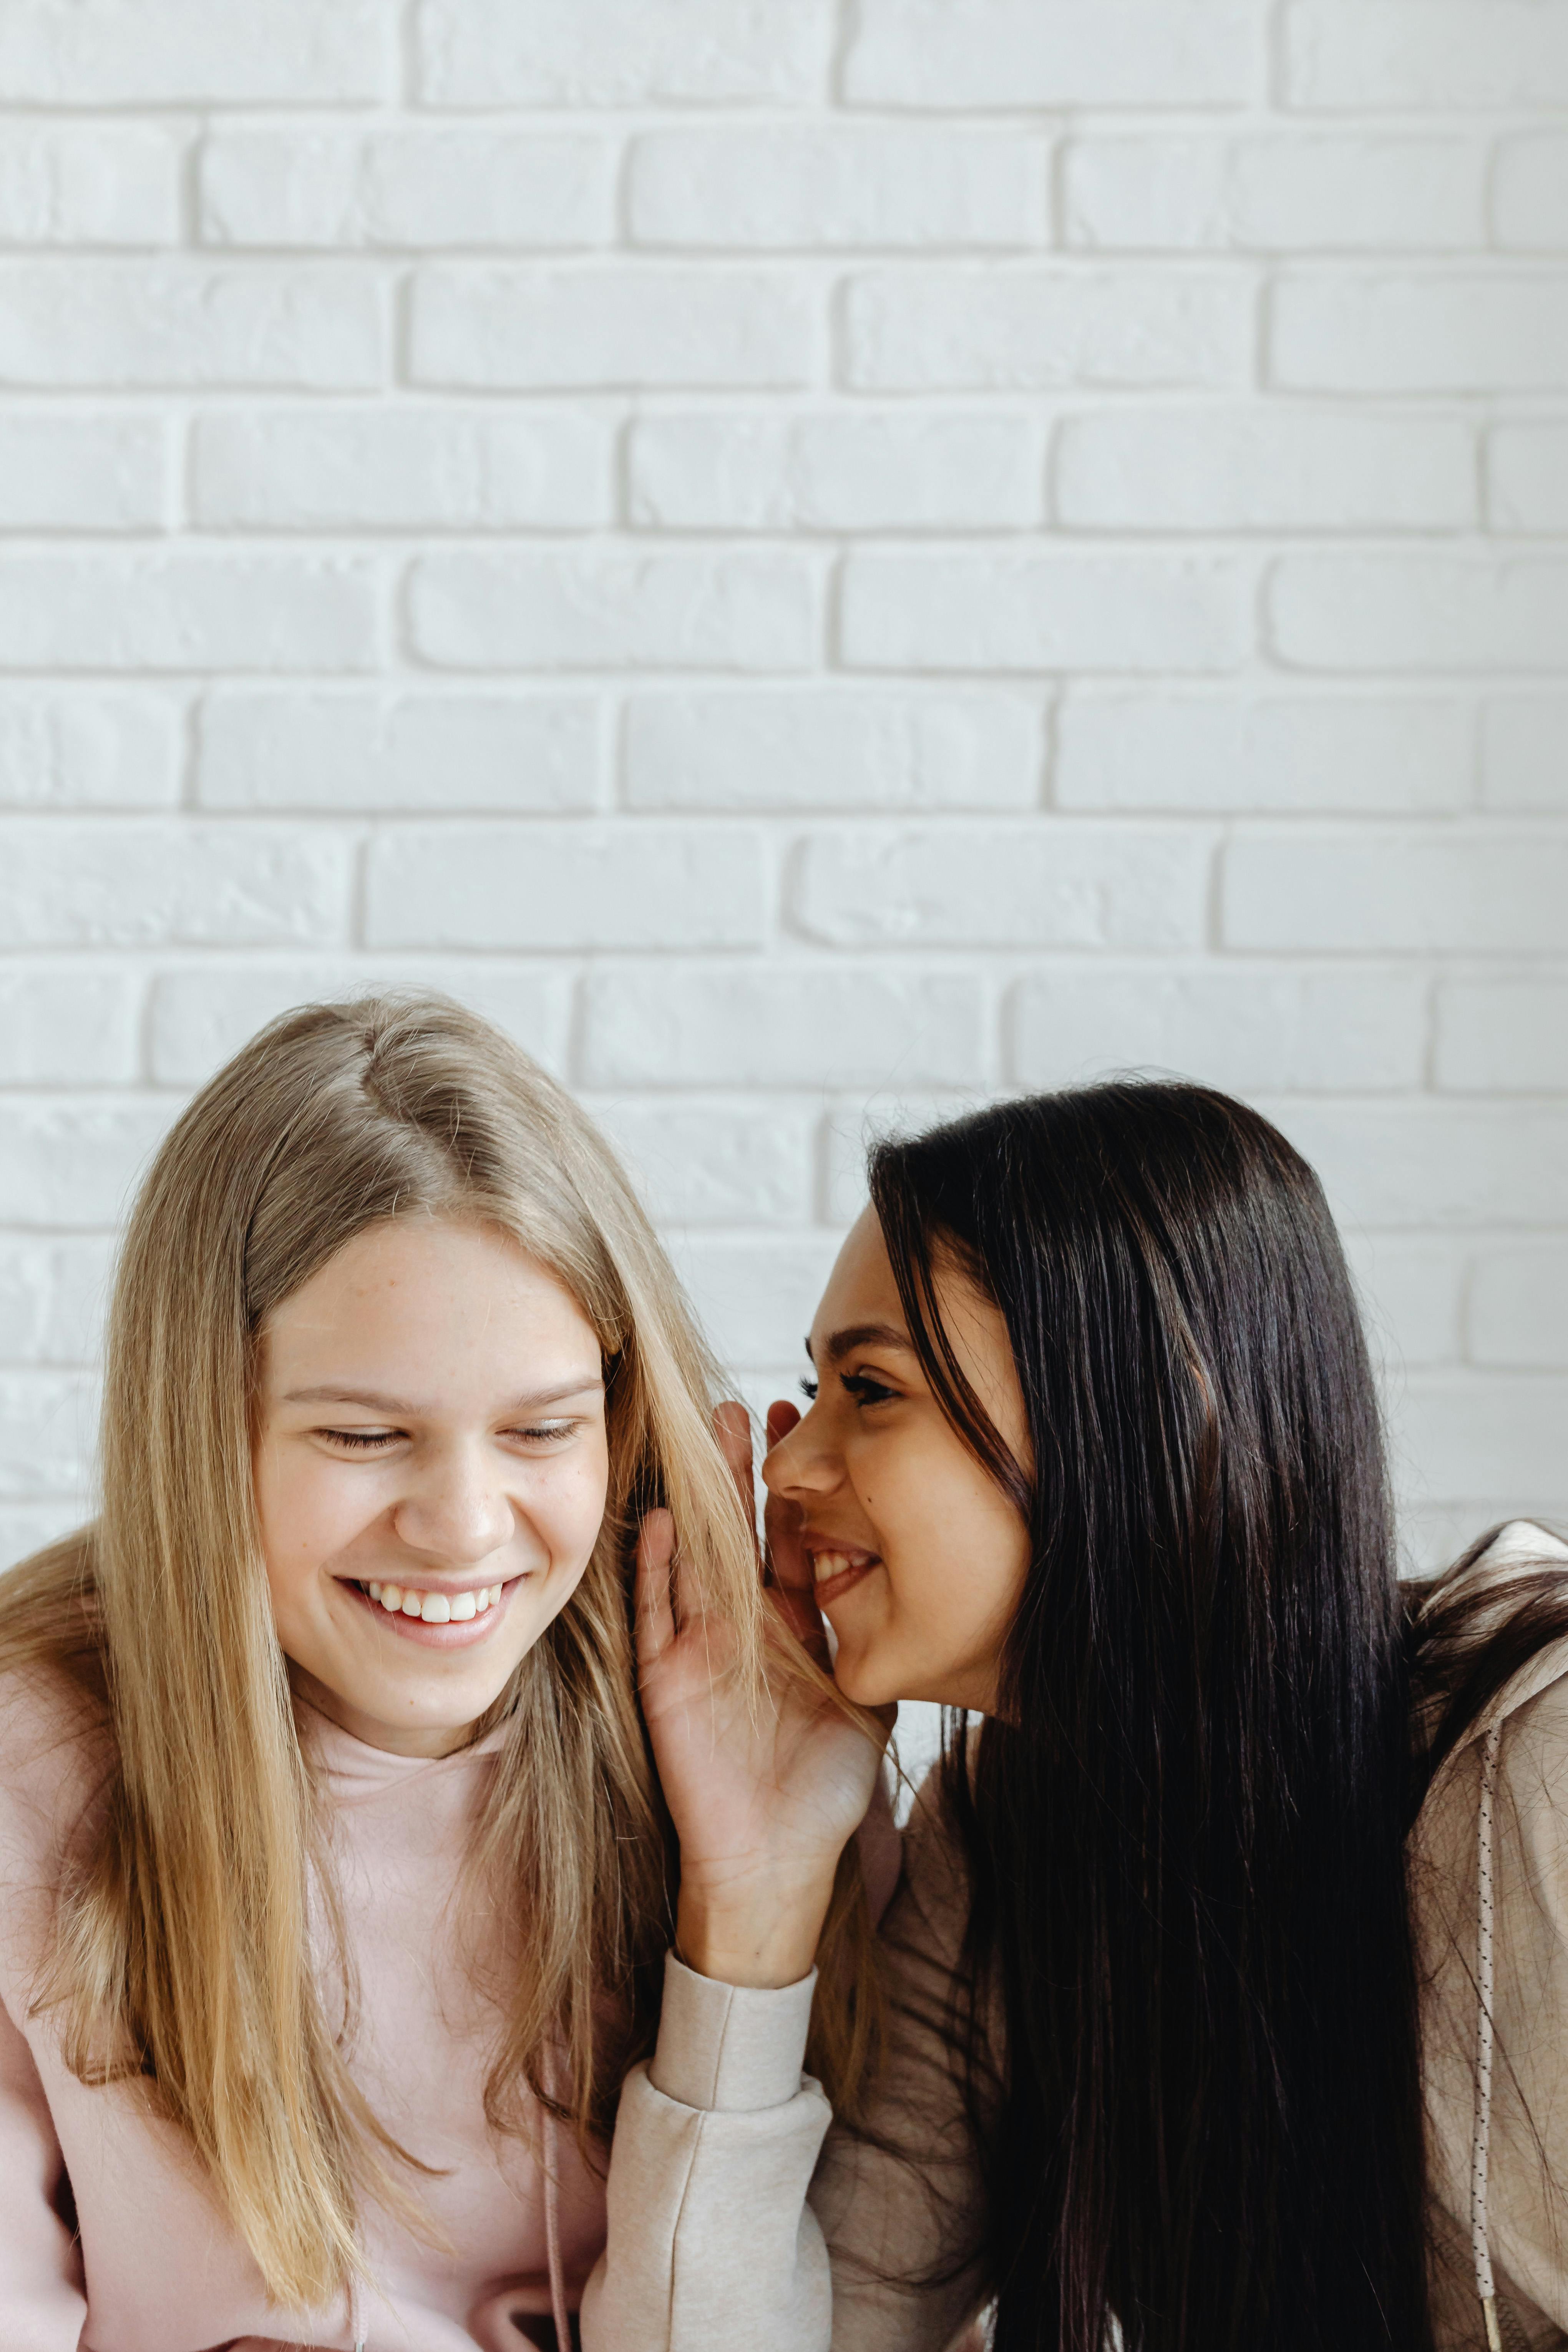 Two young women whispering | Source: Pexels